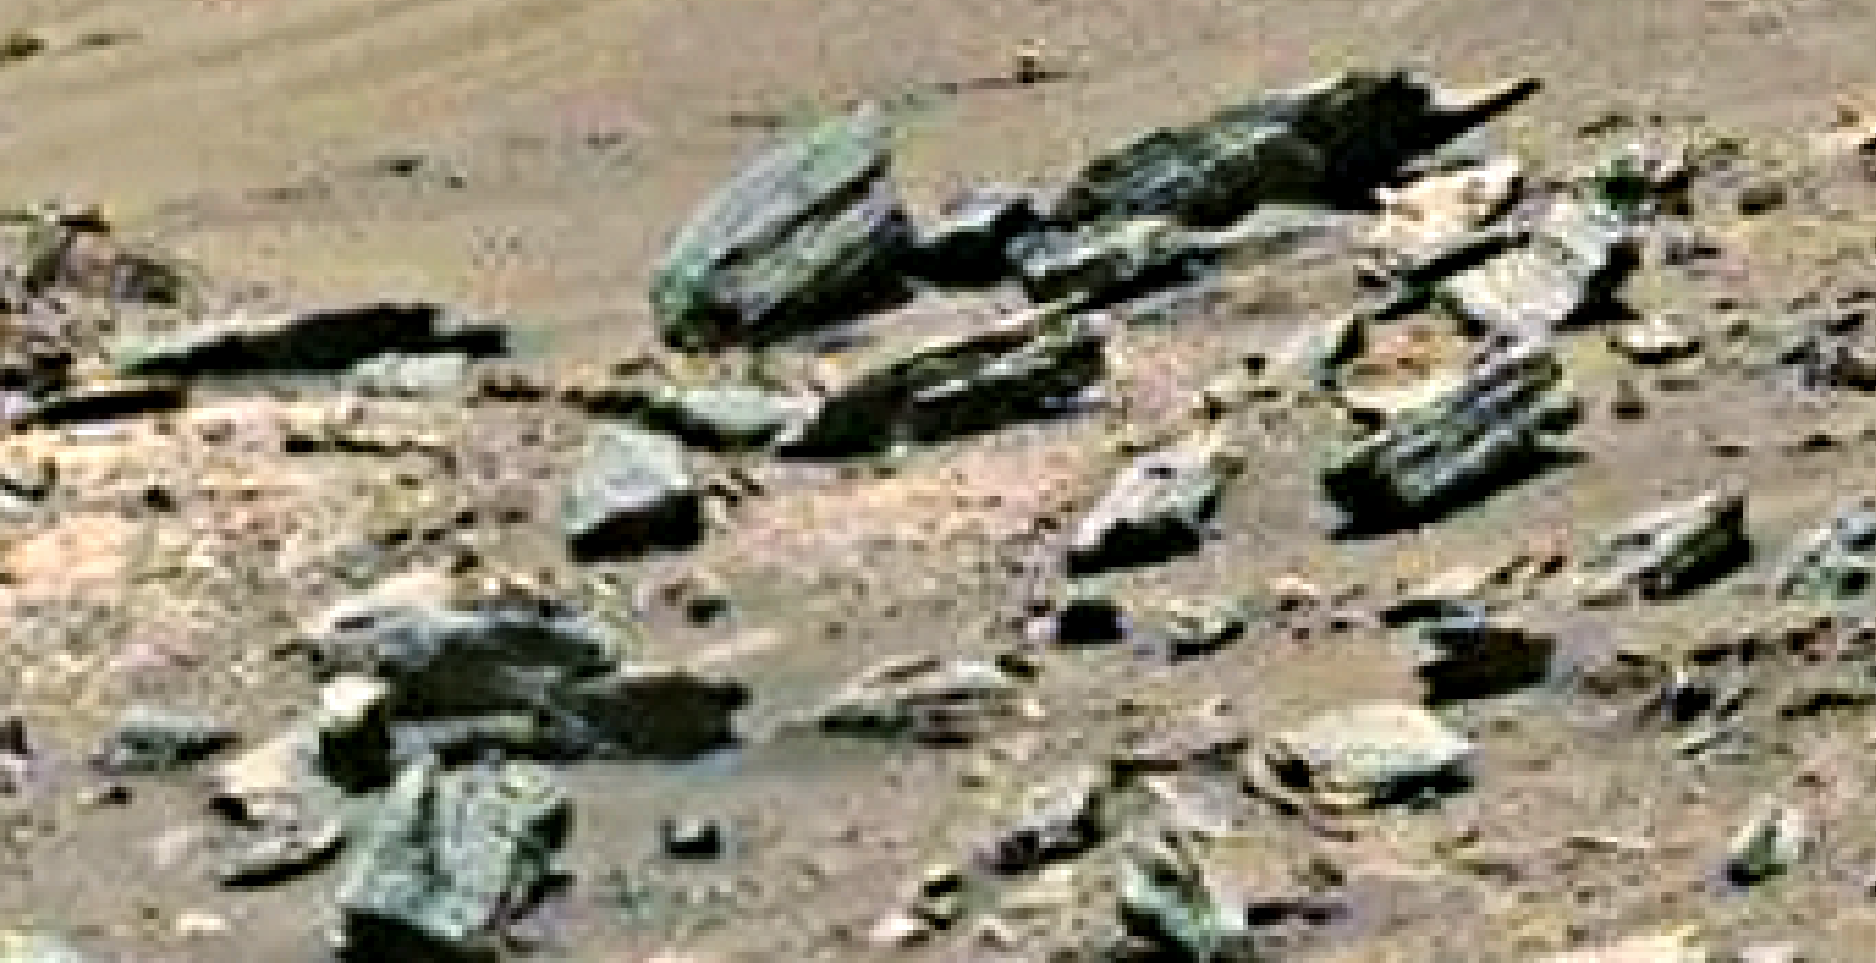 mars sol 1432 b&w anomaly artifacts 11 was life on mars